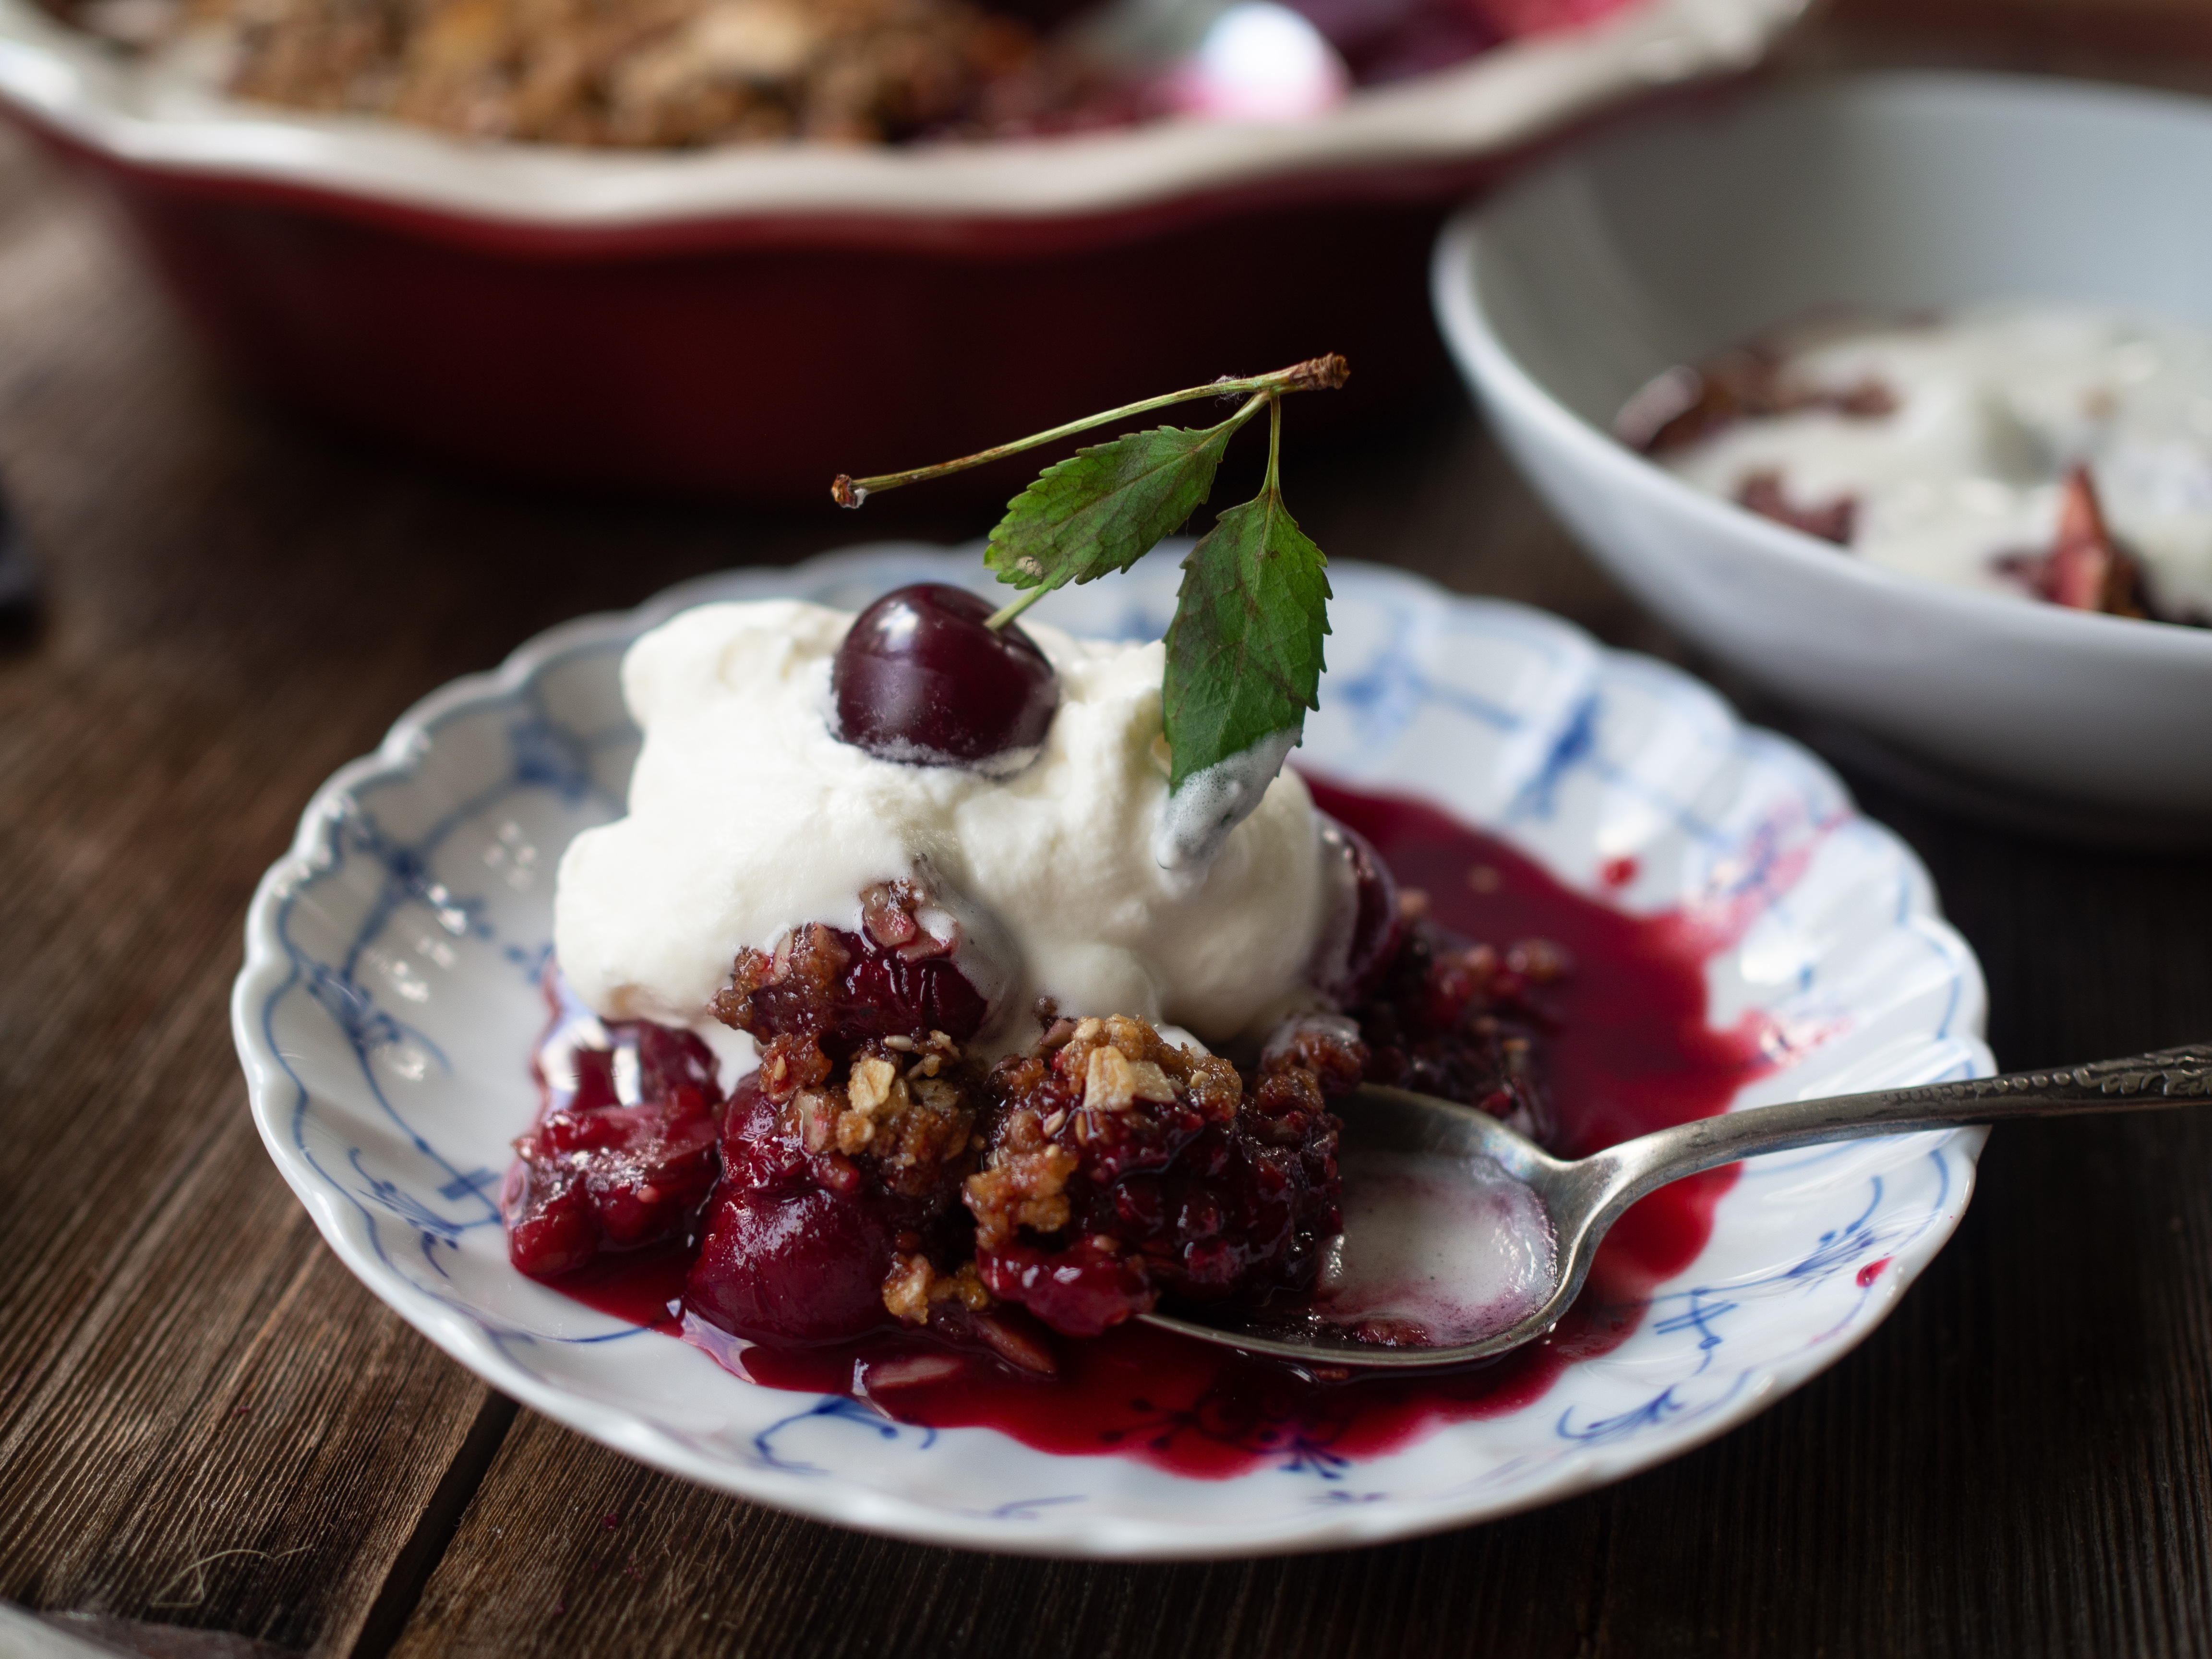 Sour Cherry Crisp with almonds and seeds (Smuldrepai med Kirsebær)